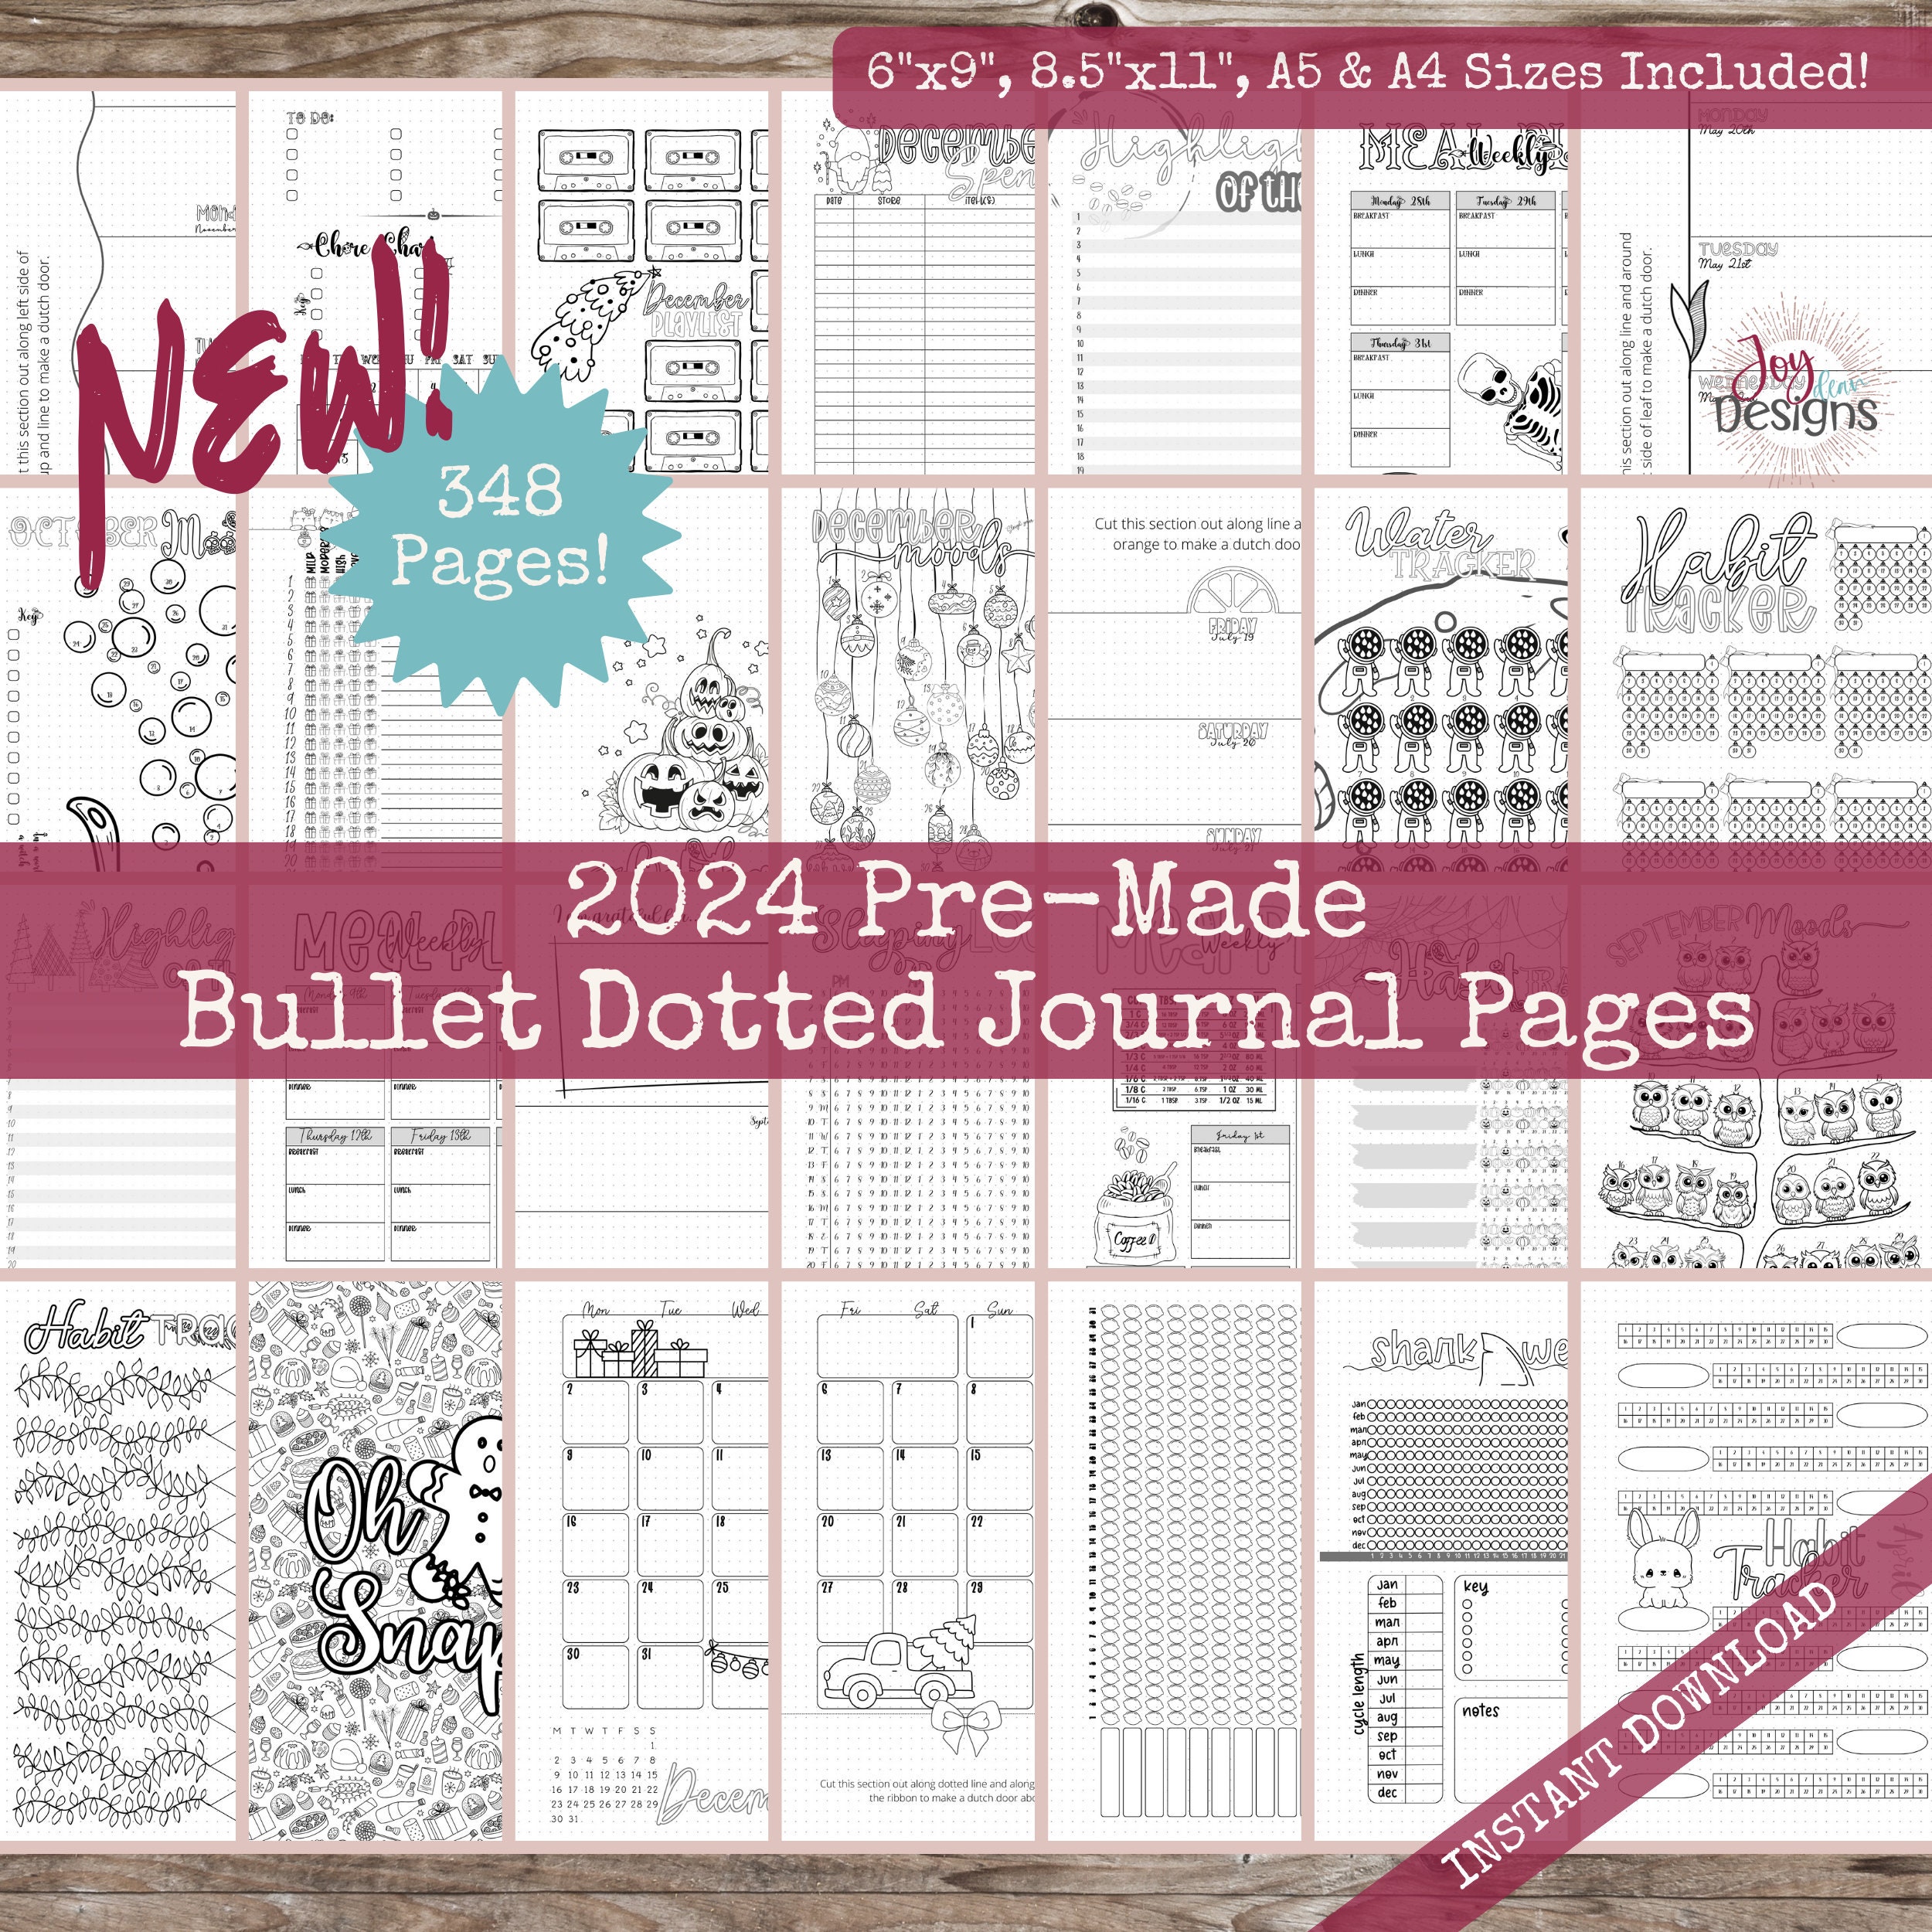  Pre-Made Bullet Dotted Journal: A Premade Dotted Planner. Track  Anxiety and Mental Health. With Prompts and Blank Pages to Make Your Own.:  Dean, Joy: Books